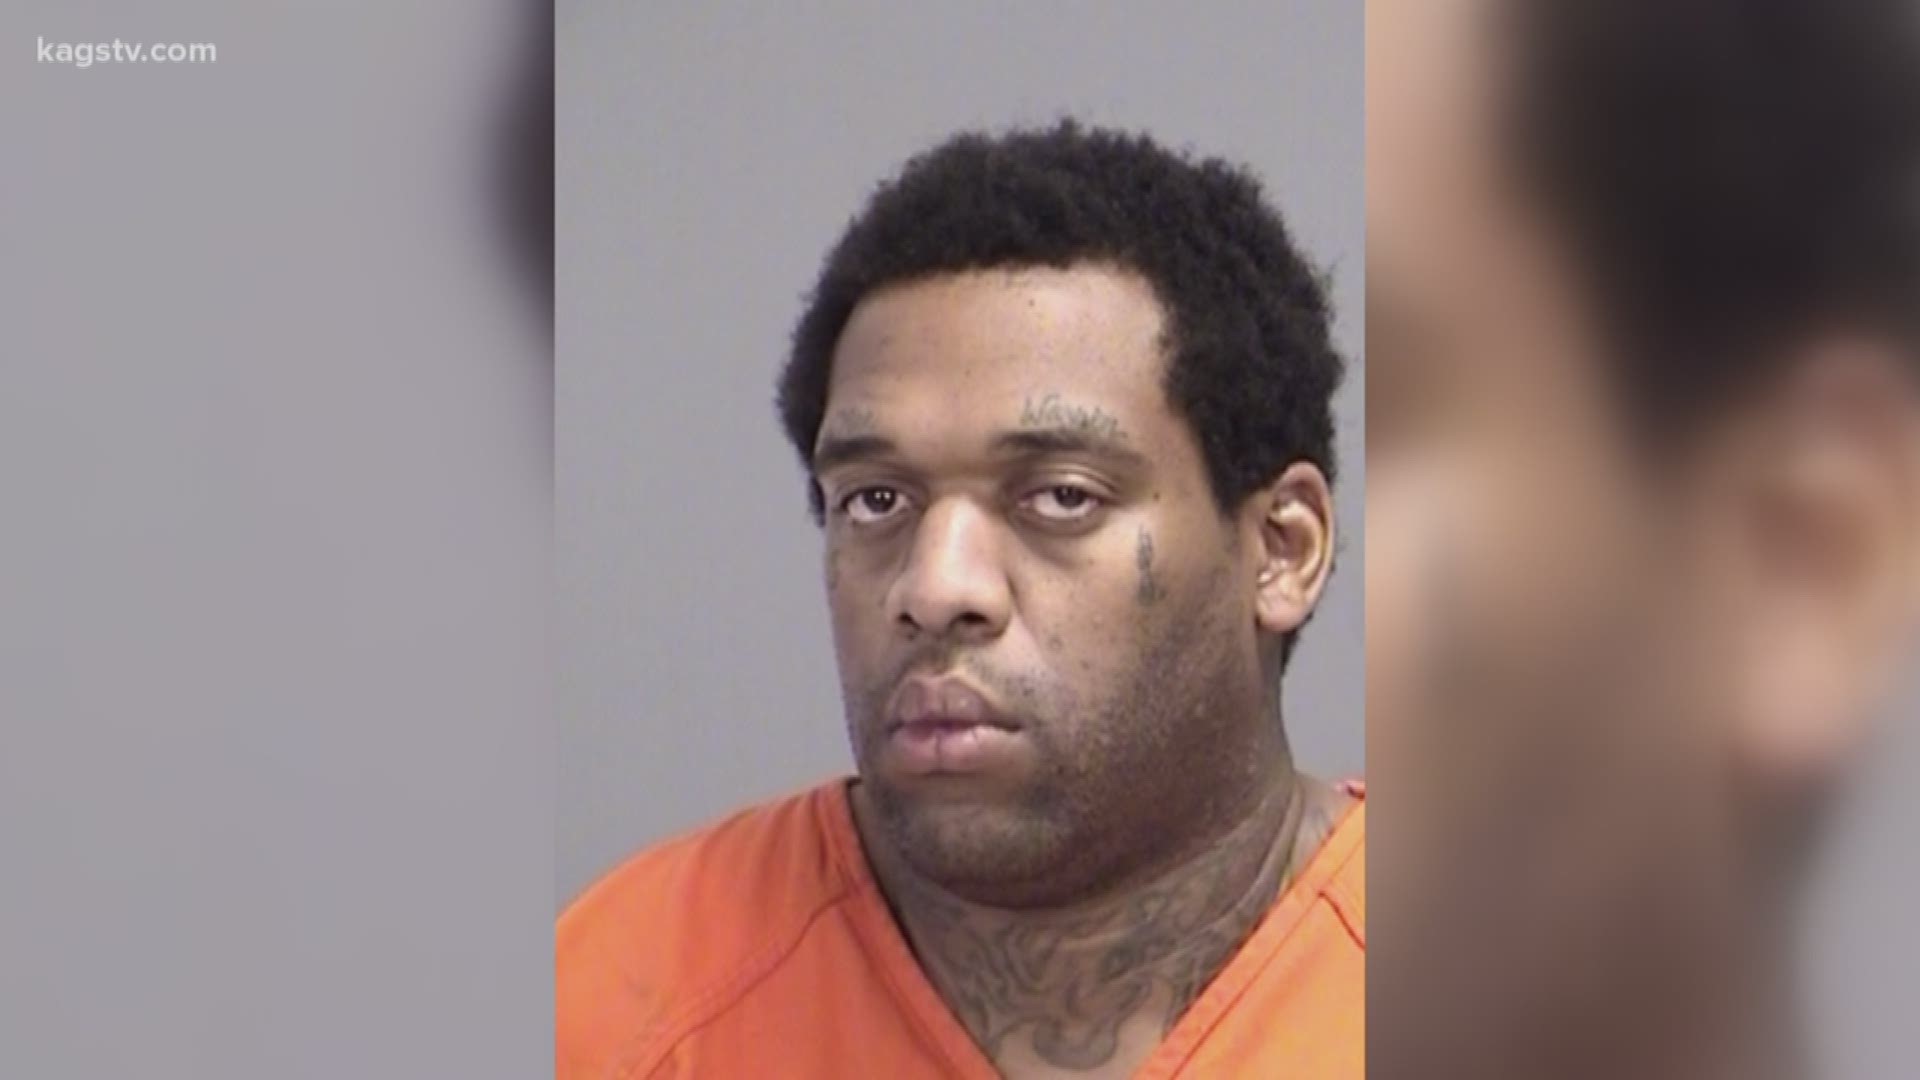 Charles Nelson was sentenced to life in jail for shooting at a DPS trooper in 2017.